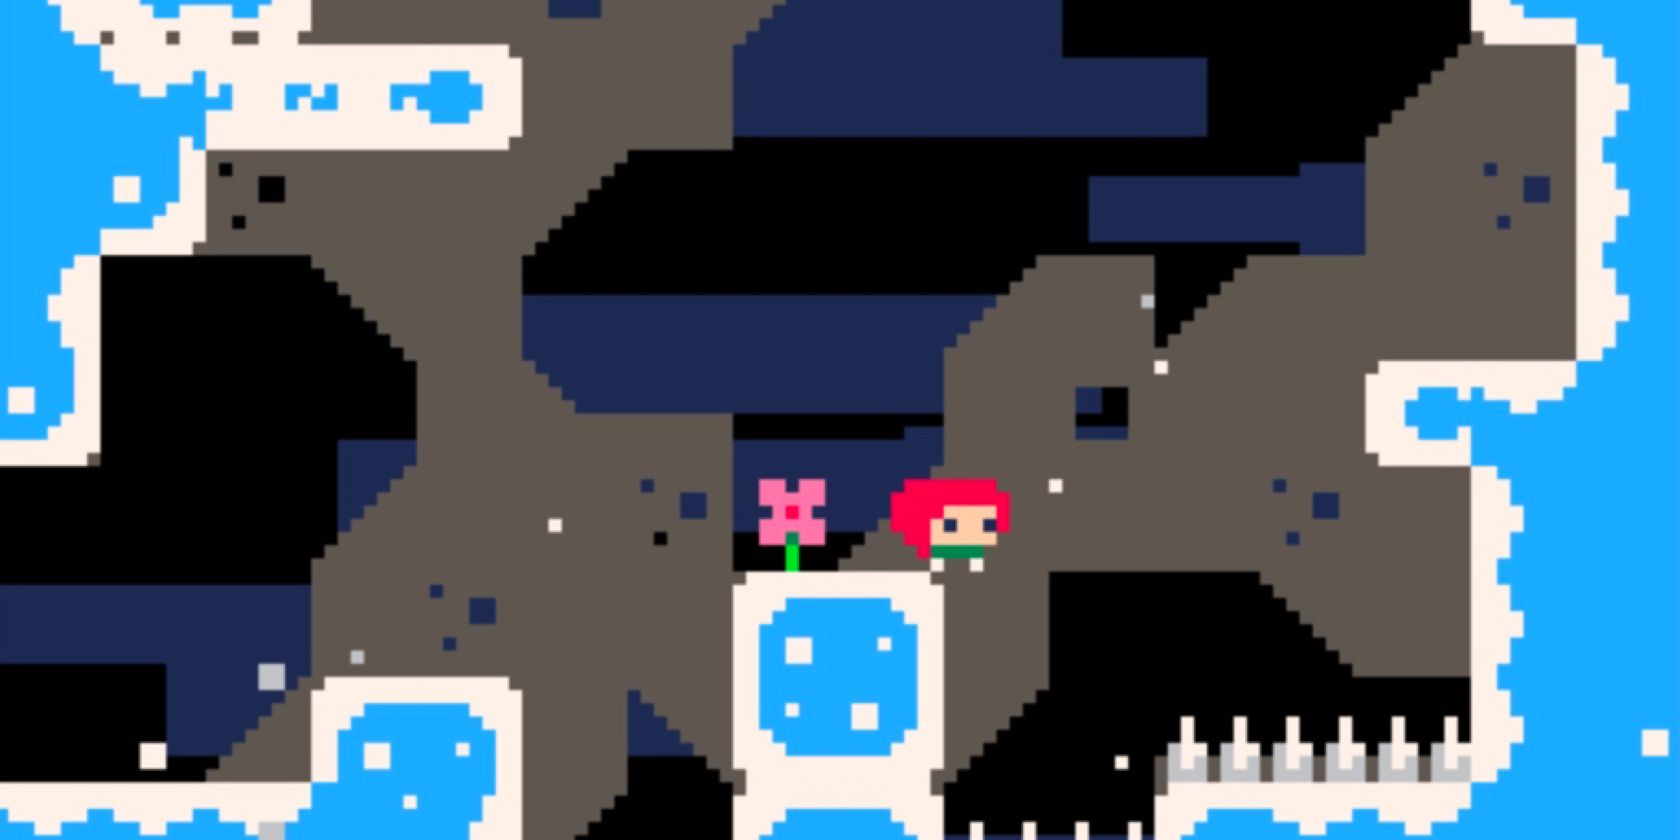 The PICO-8 Celeste prototype shows a red-headed character standing on a platform near spikes